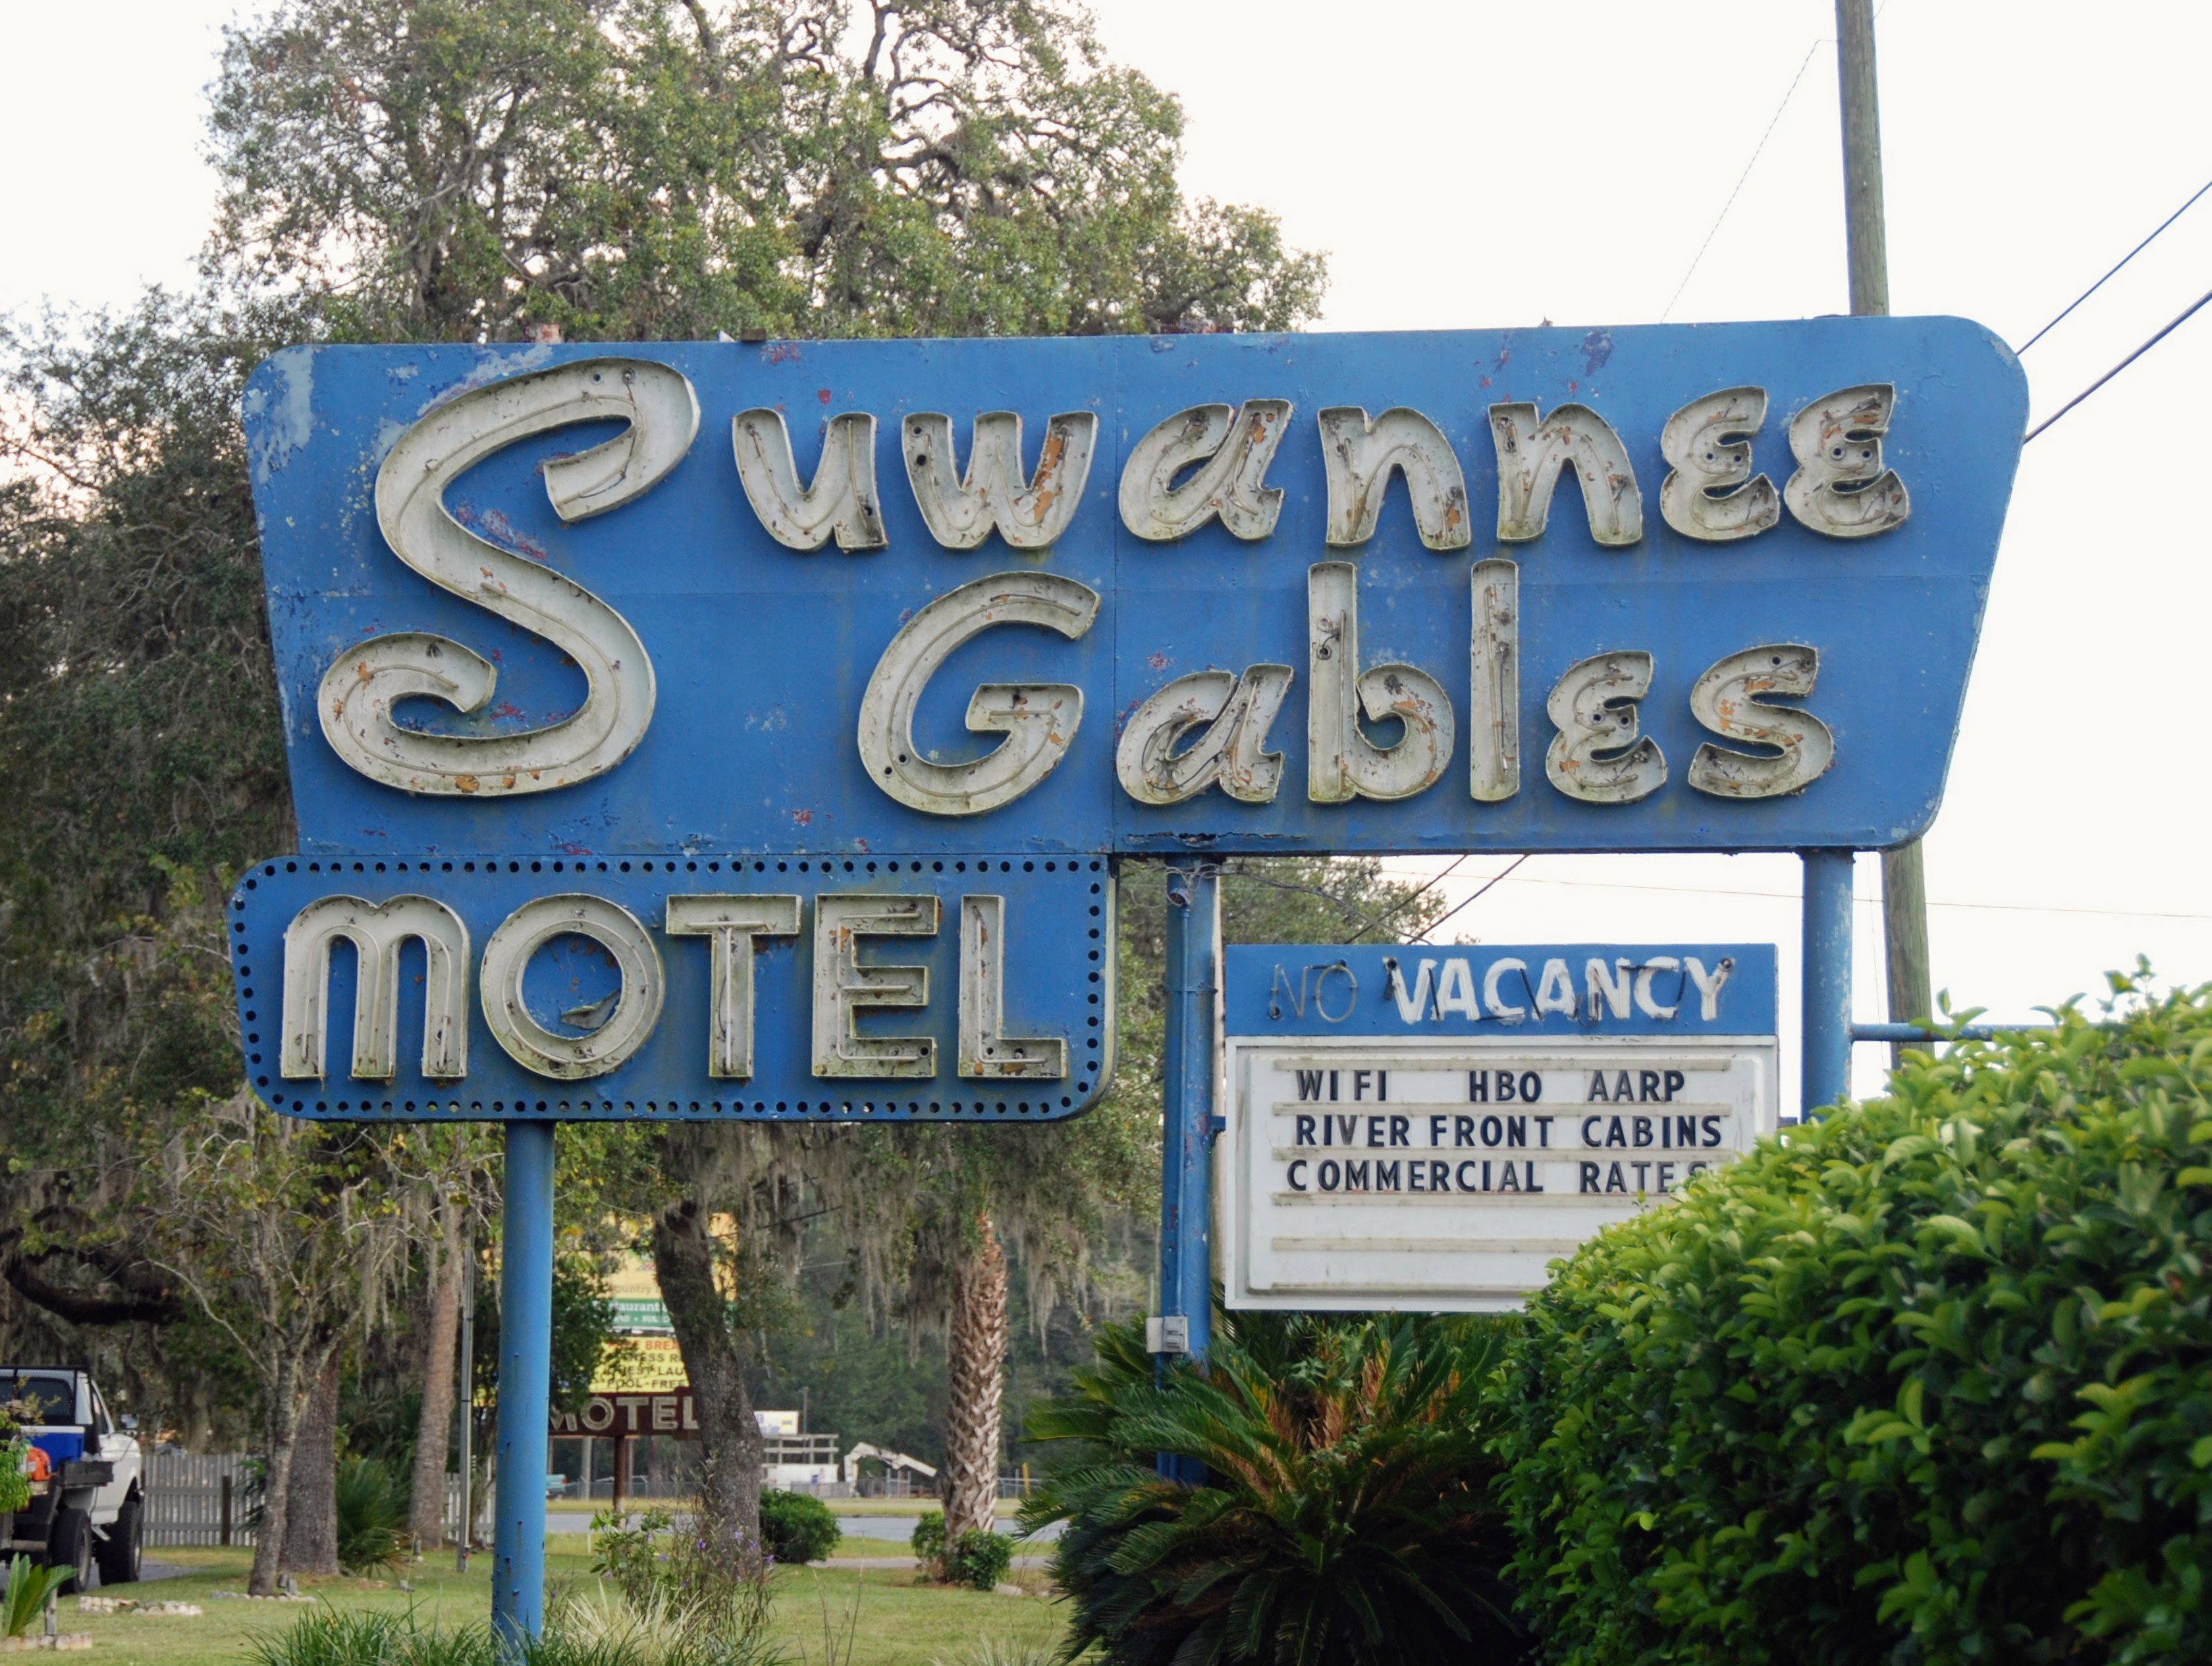 Suwannee Gables Motel and Marina - 27659 SE Highway 19, Old Town, Florida U.S.A. - September 28, 2017